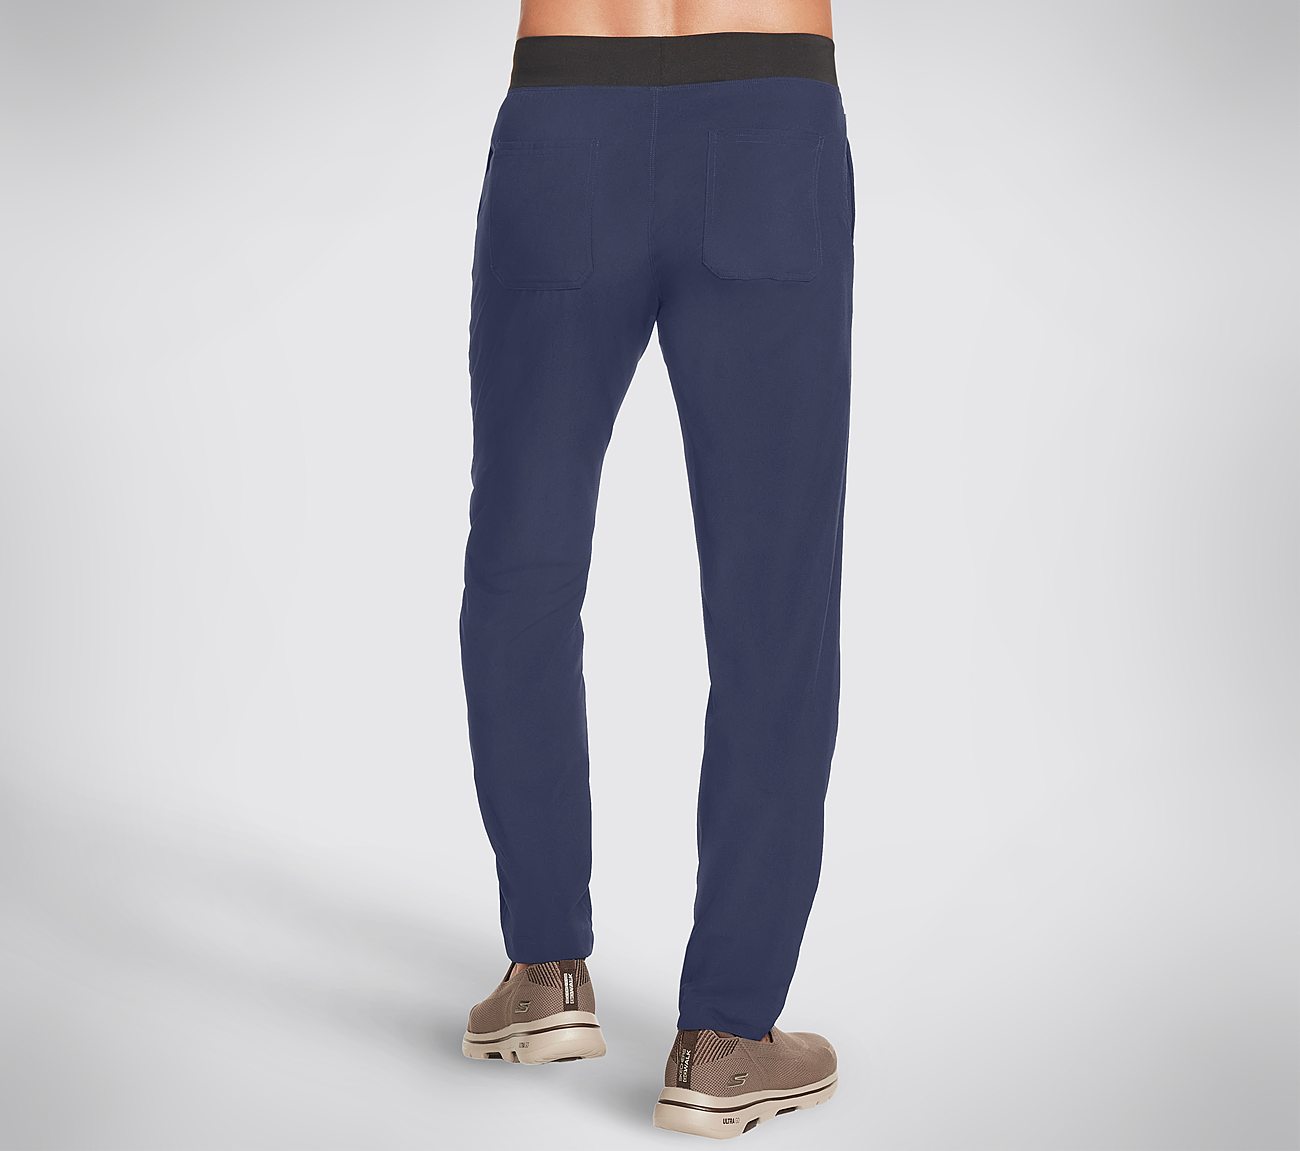 GO WALK ACTION PANT, NNNAVY Apparel Top View